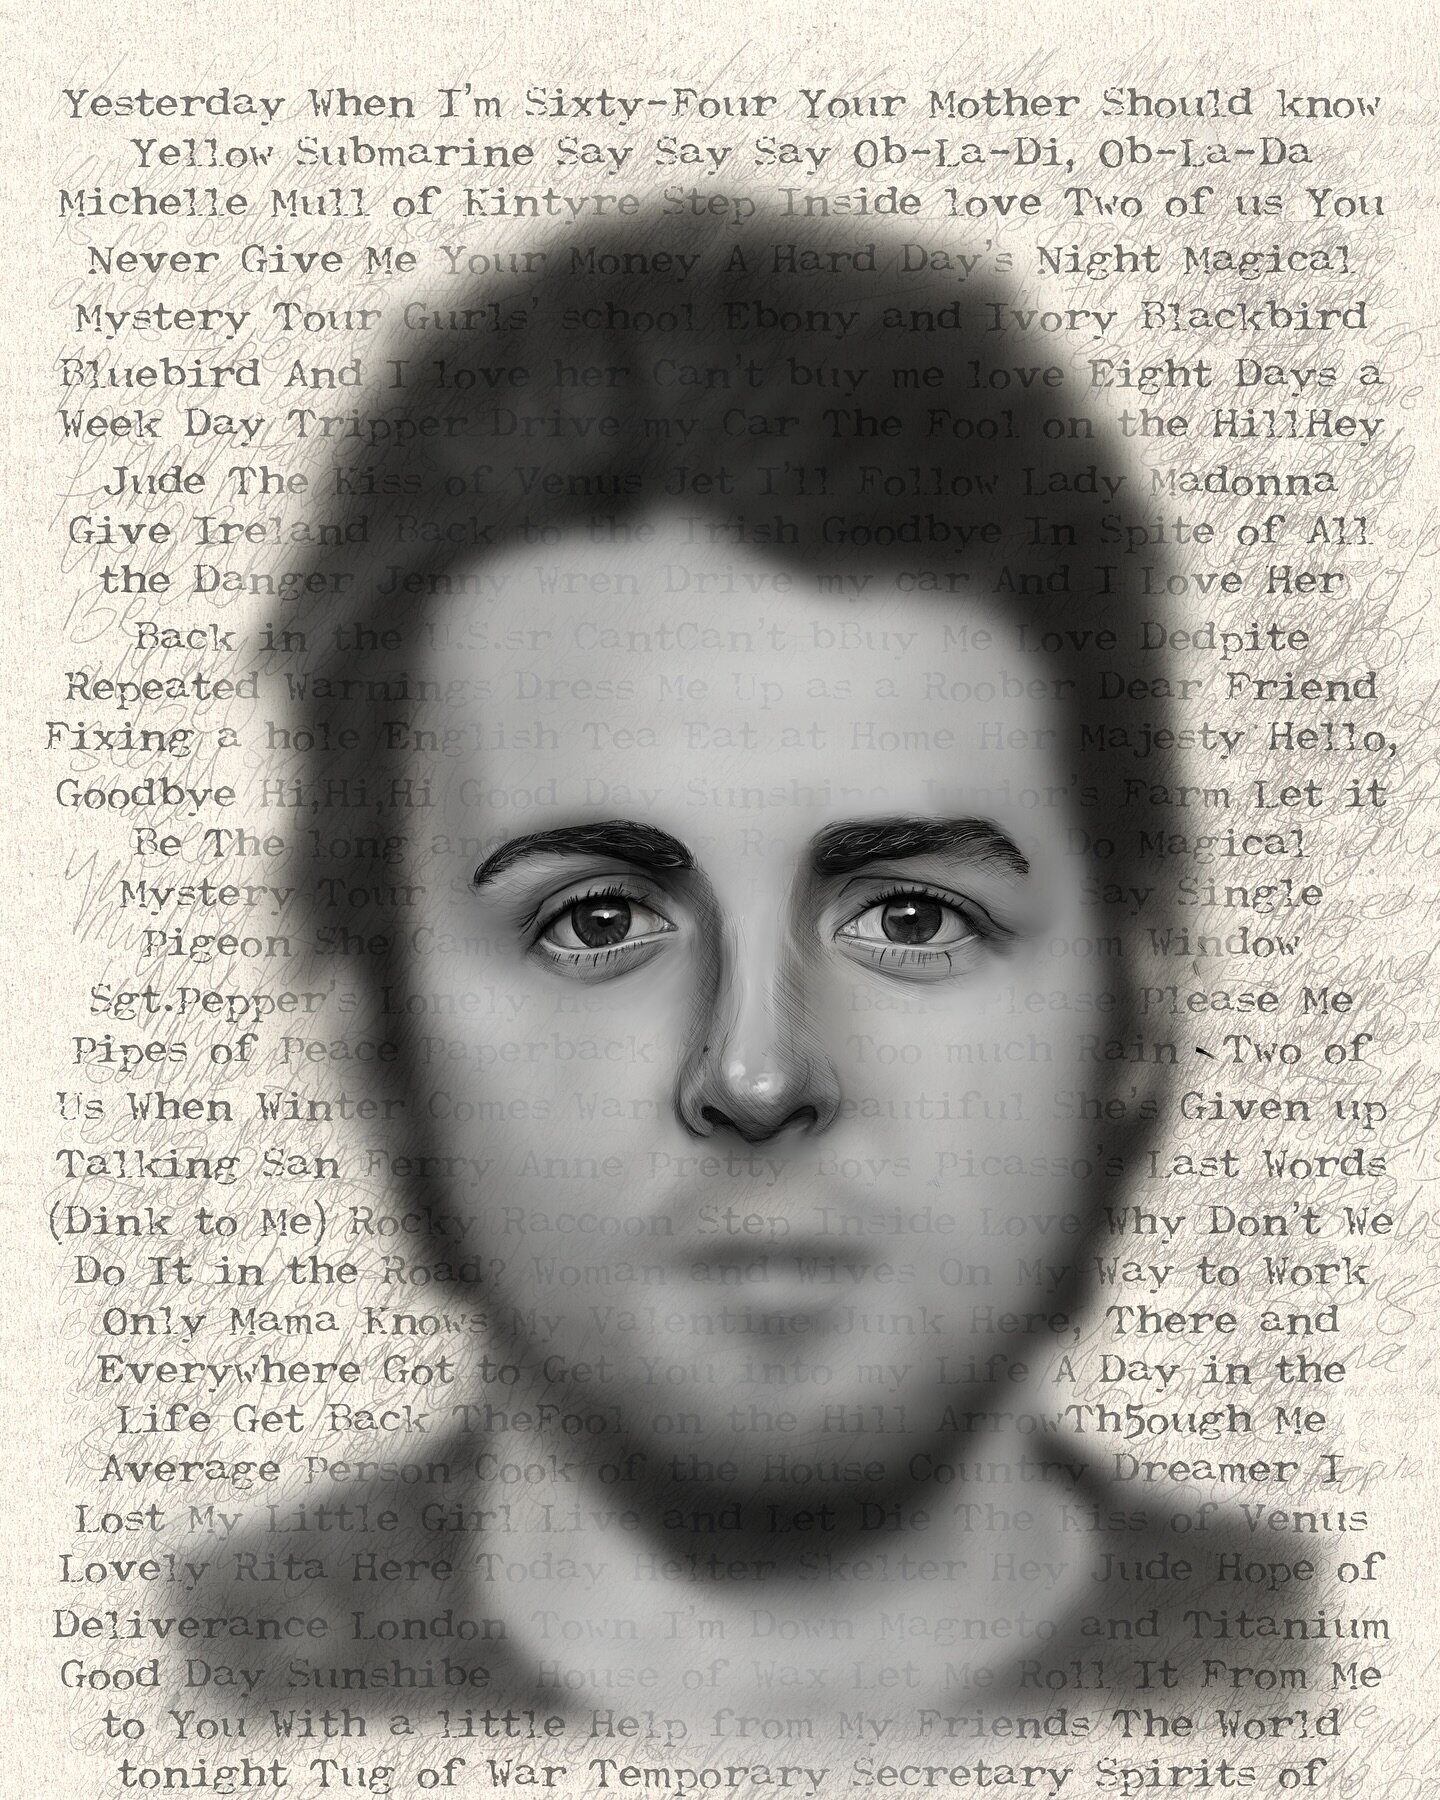 A wee play around with the McCartney image.. 

I love the fade and blur and then redraw of the eyes..